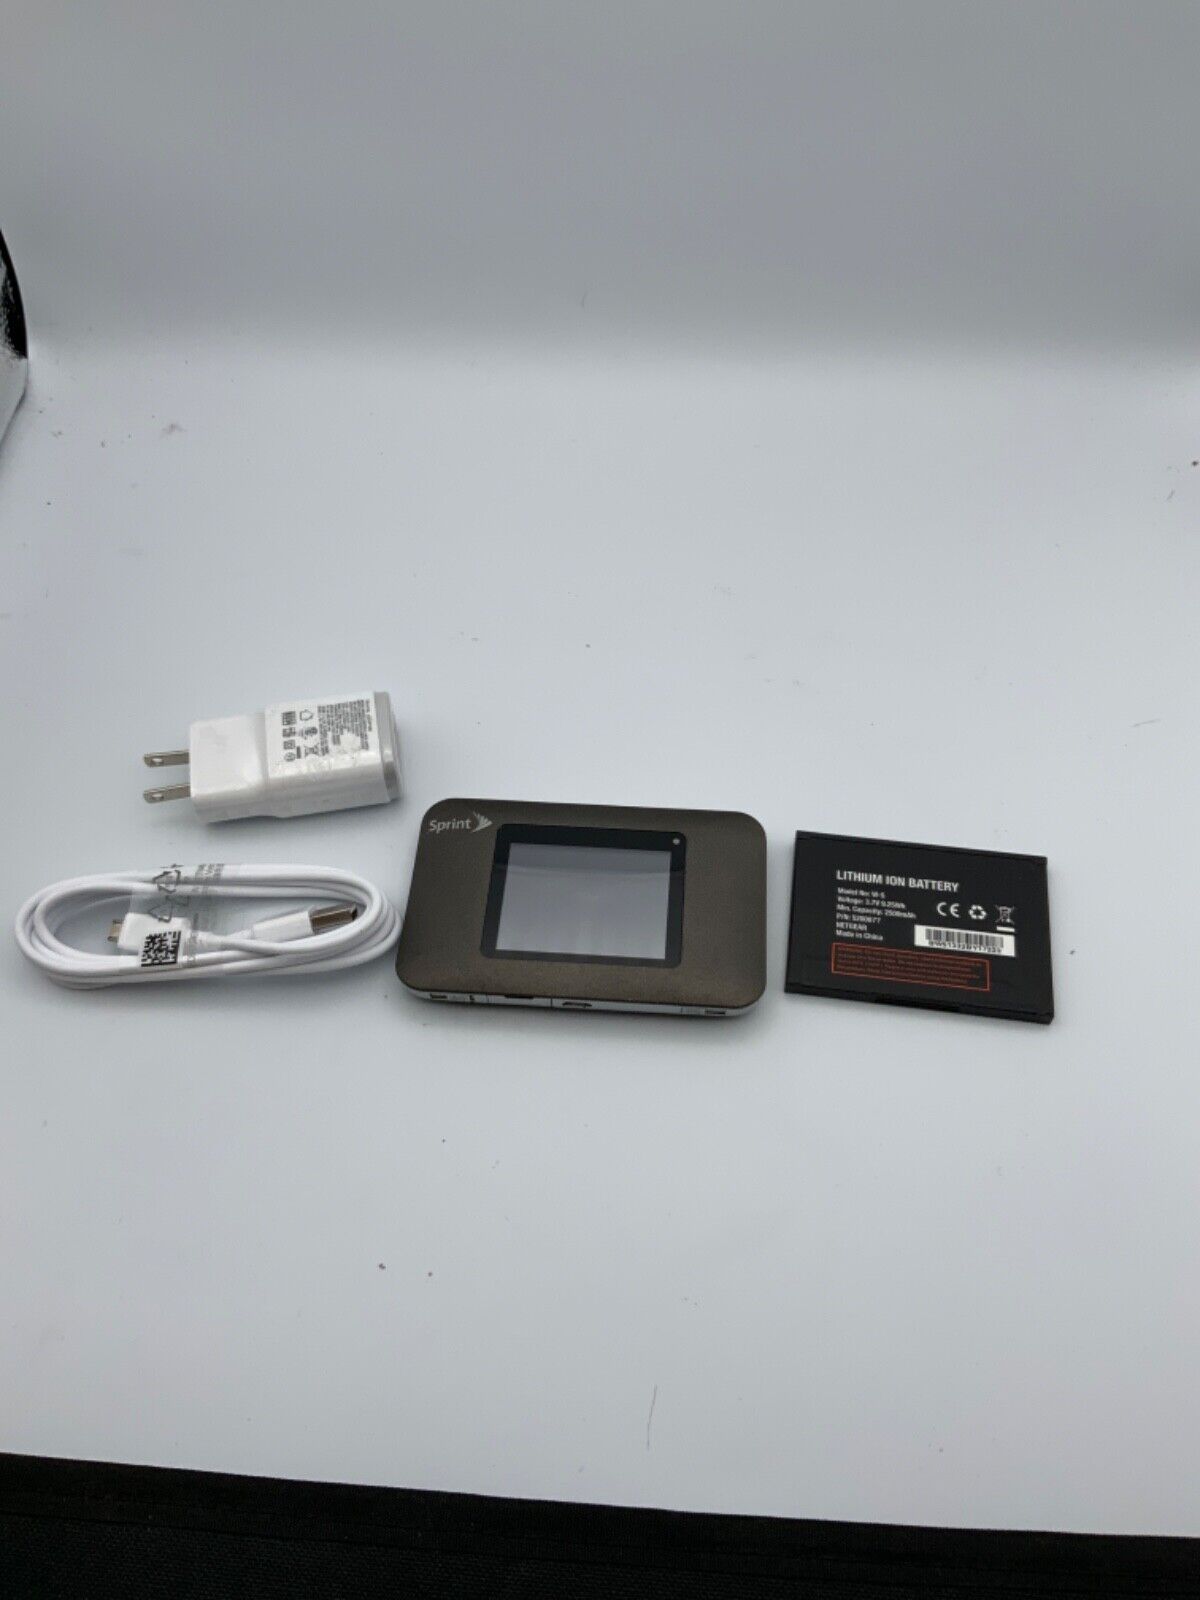 Sprint AC771 NETGEAR with charger and Lithium Ion Battery